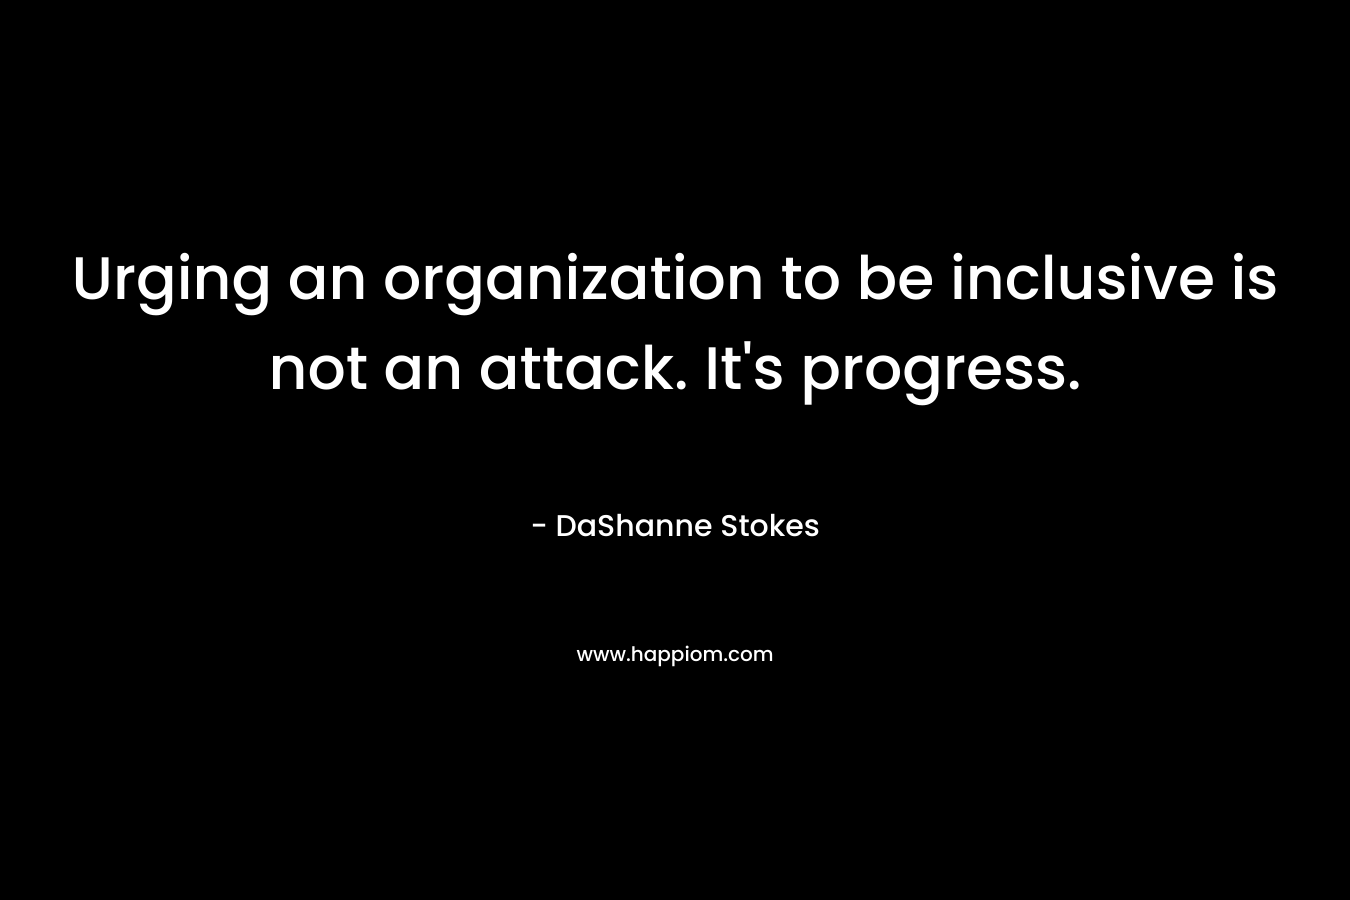 Urging an organization to be inclusive is not an attack. It's progress.